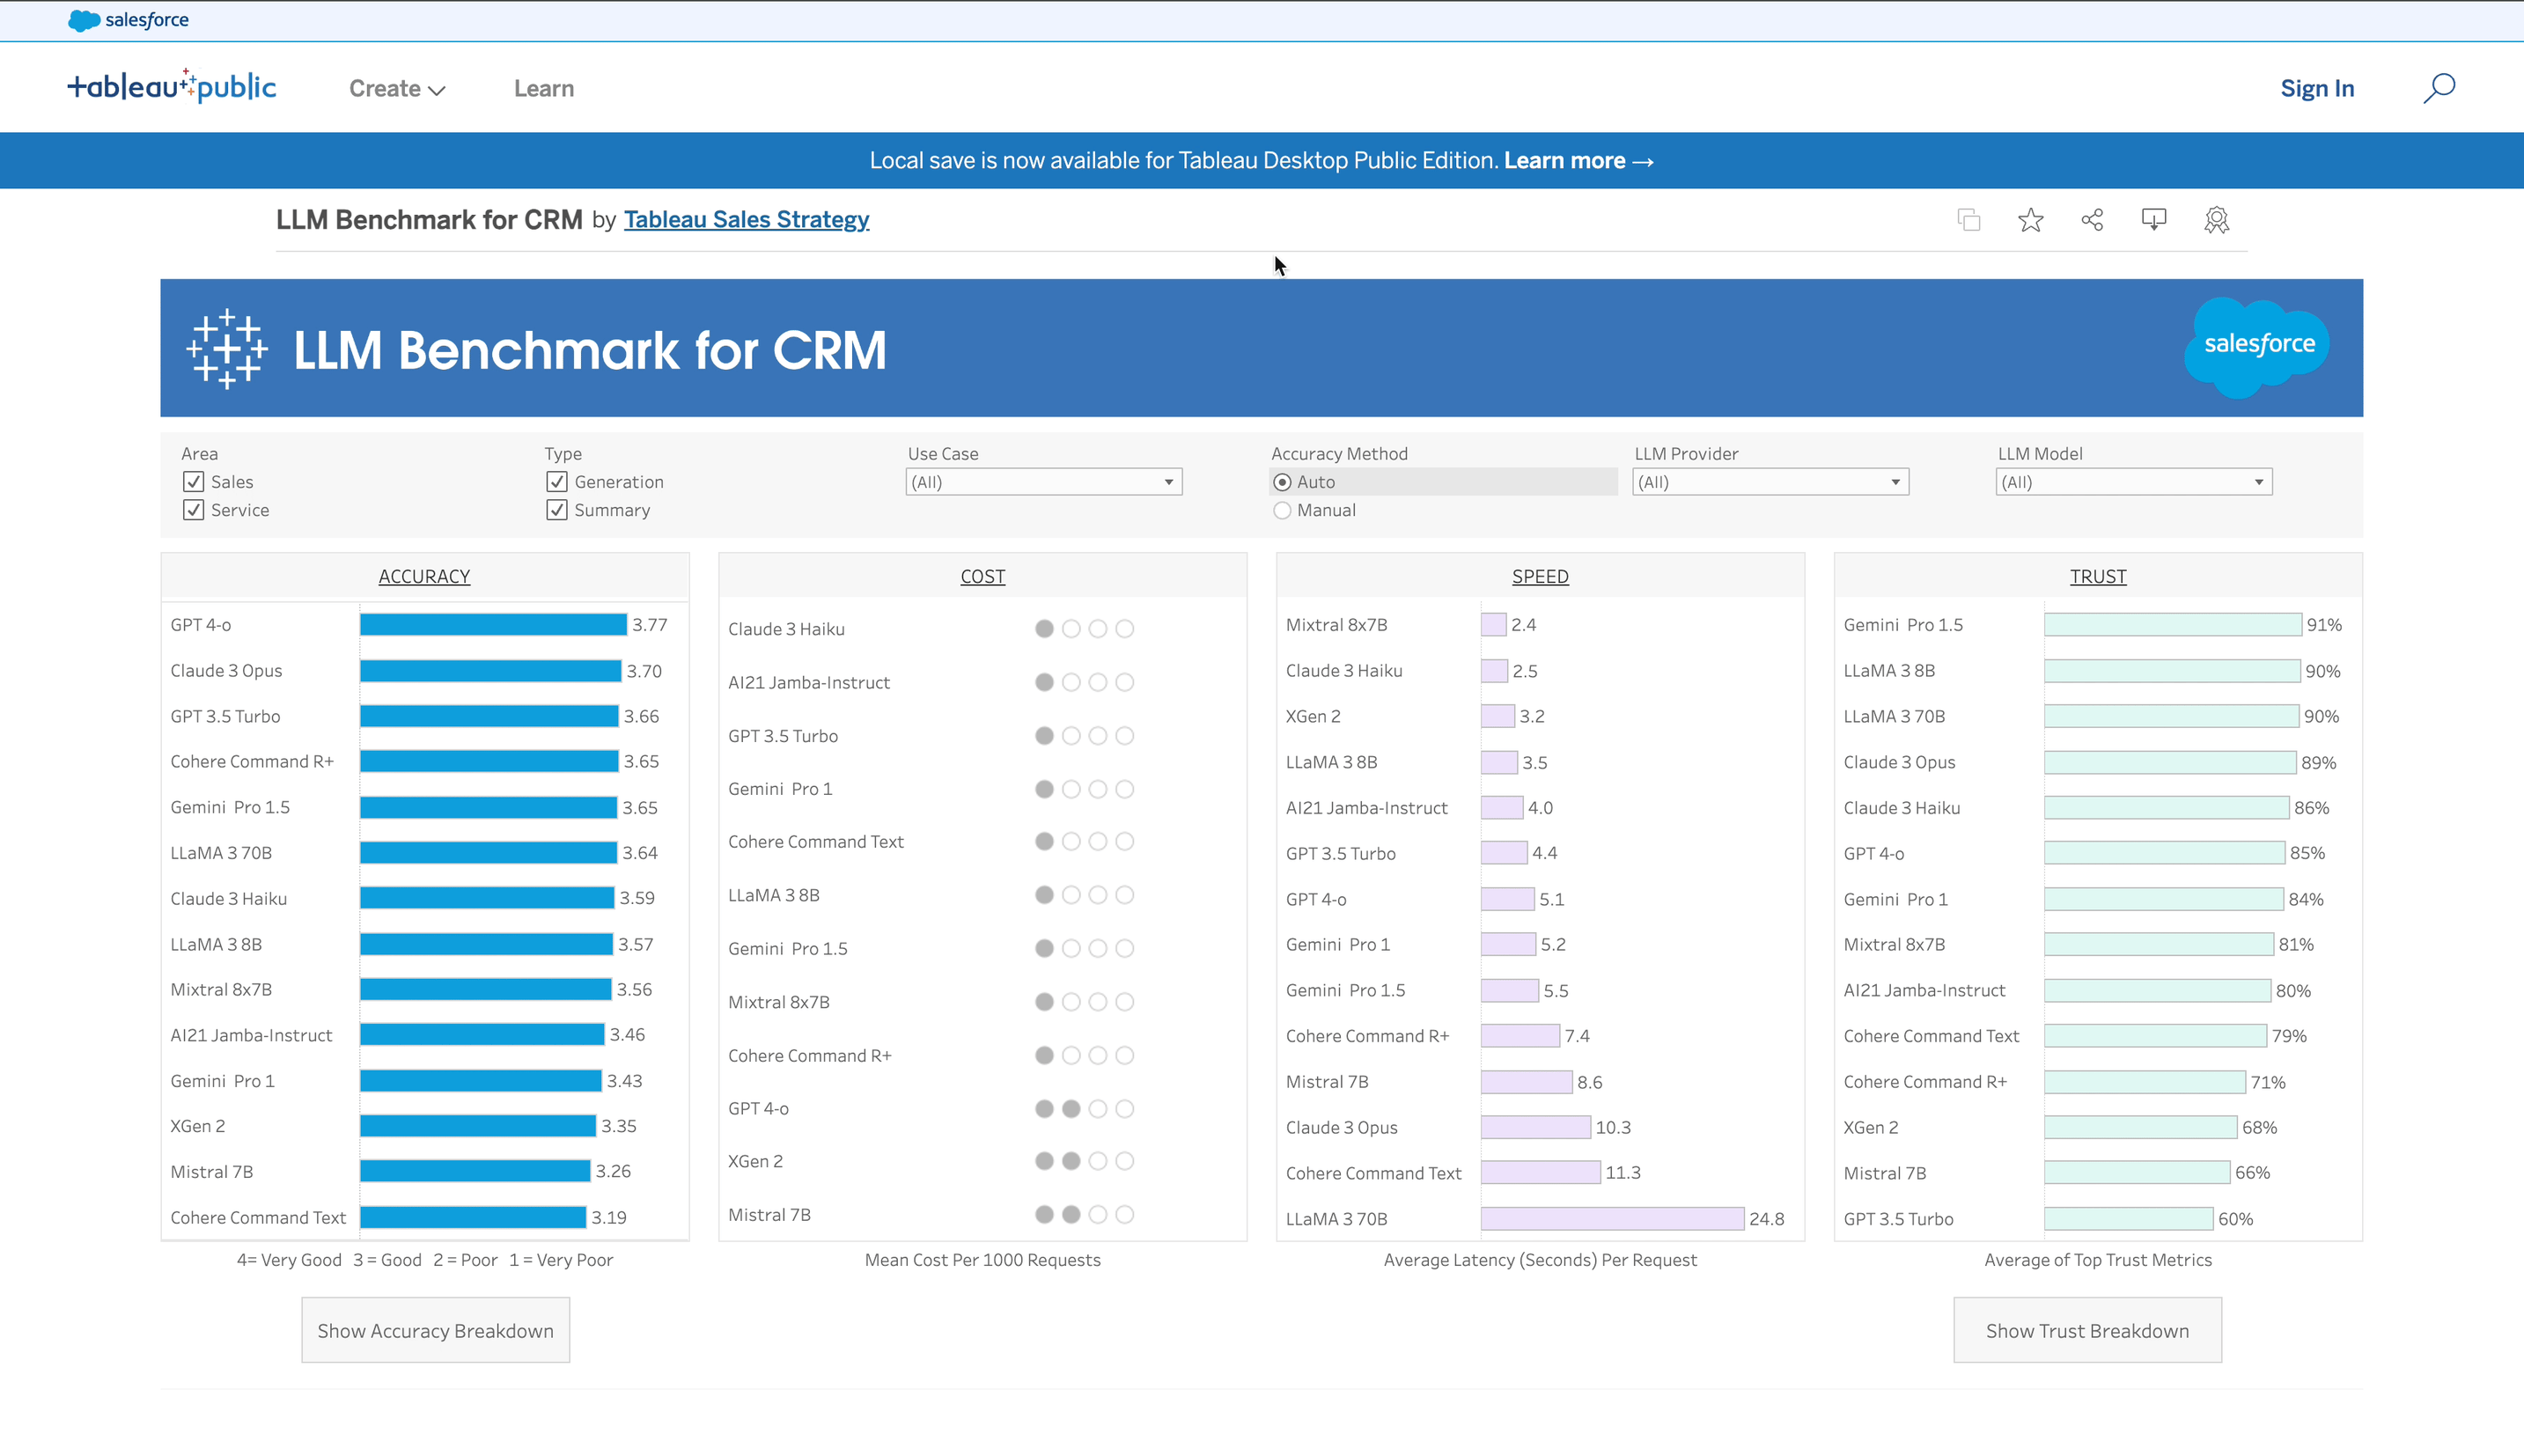 GIF showing how to use the new Salesforce LLM benchmark